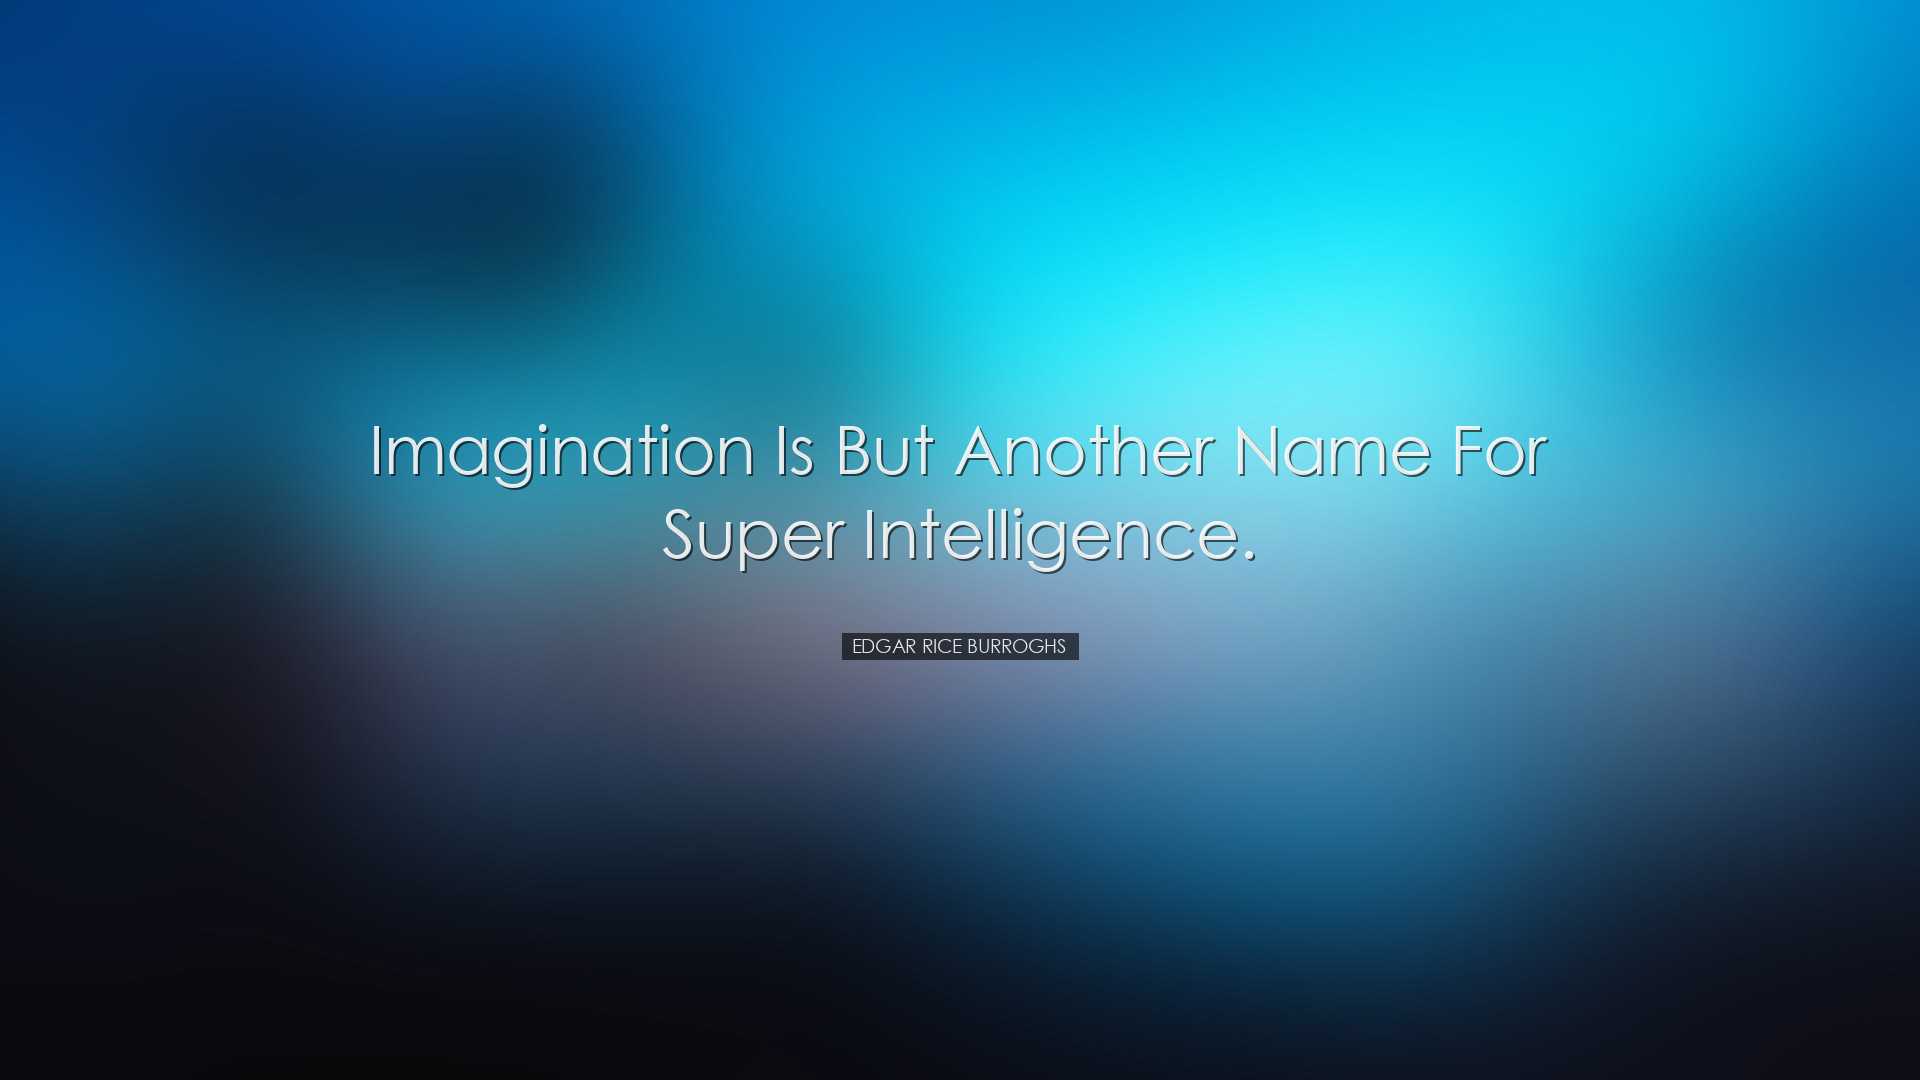 Imagination is but another name for super intelligence. - Edgar Ri